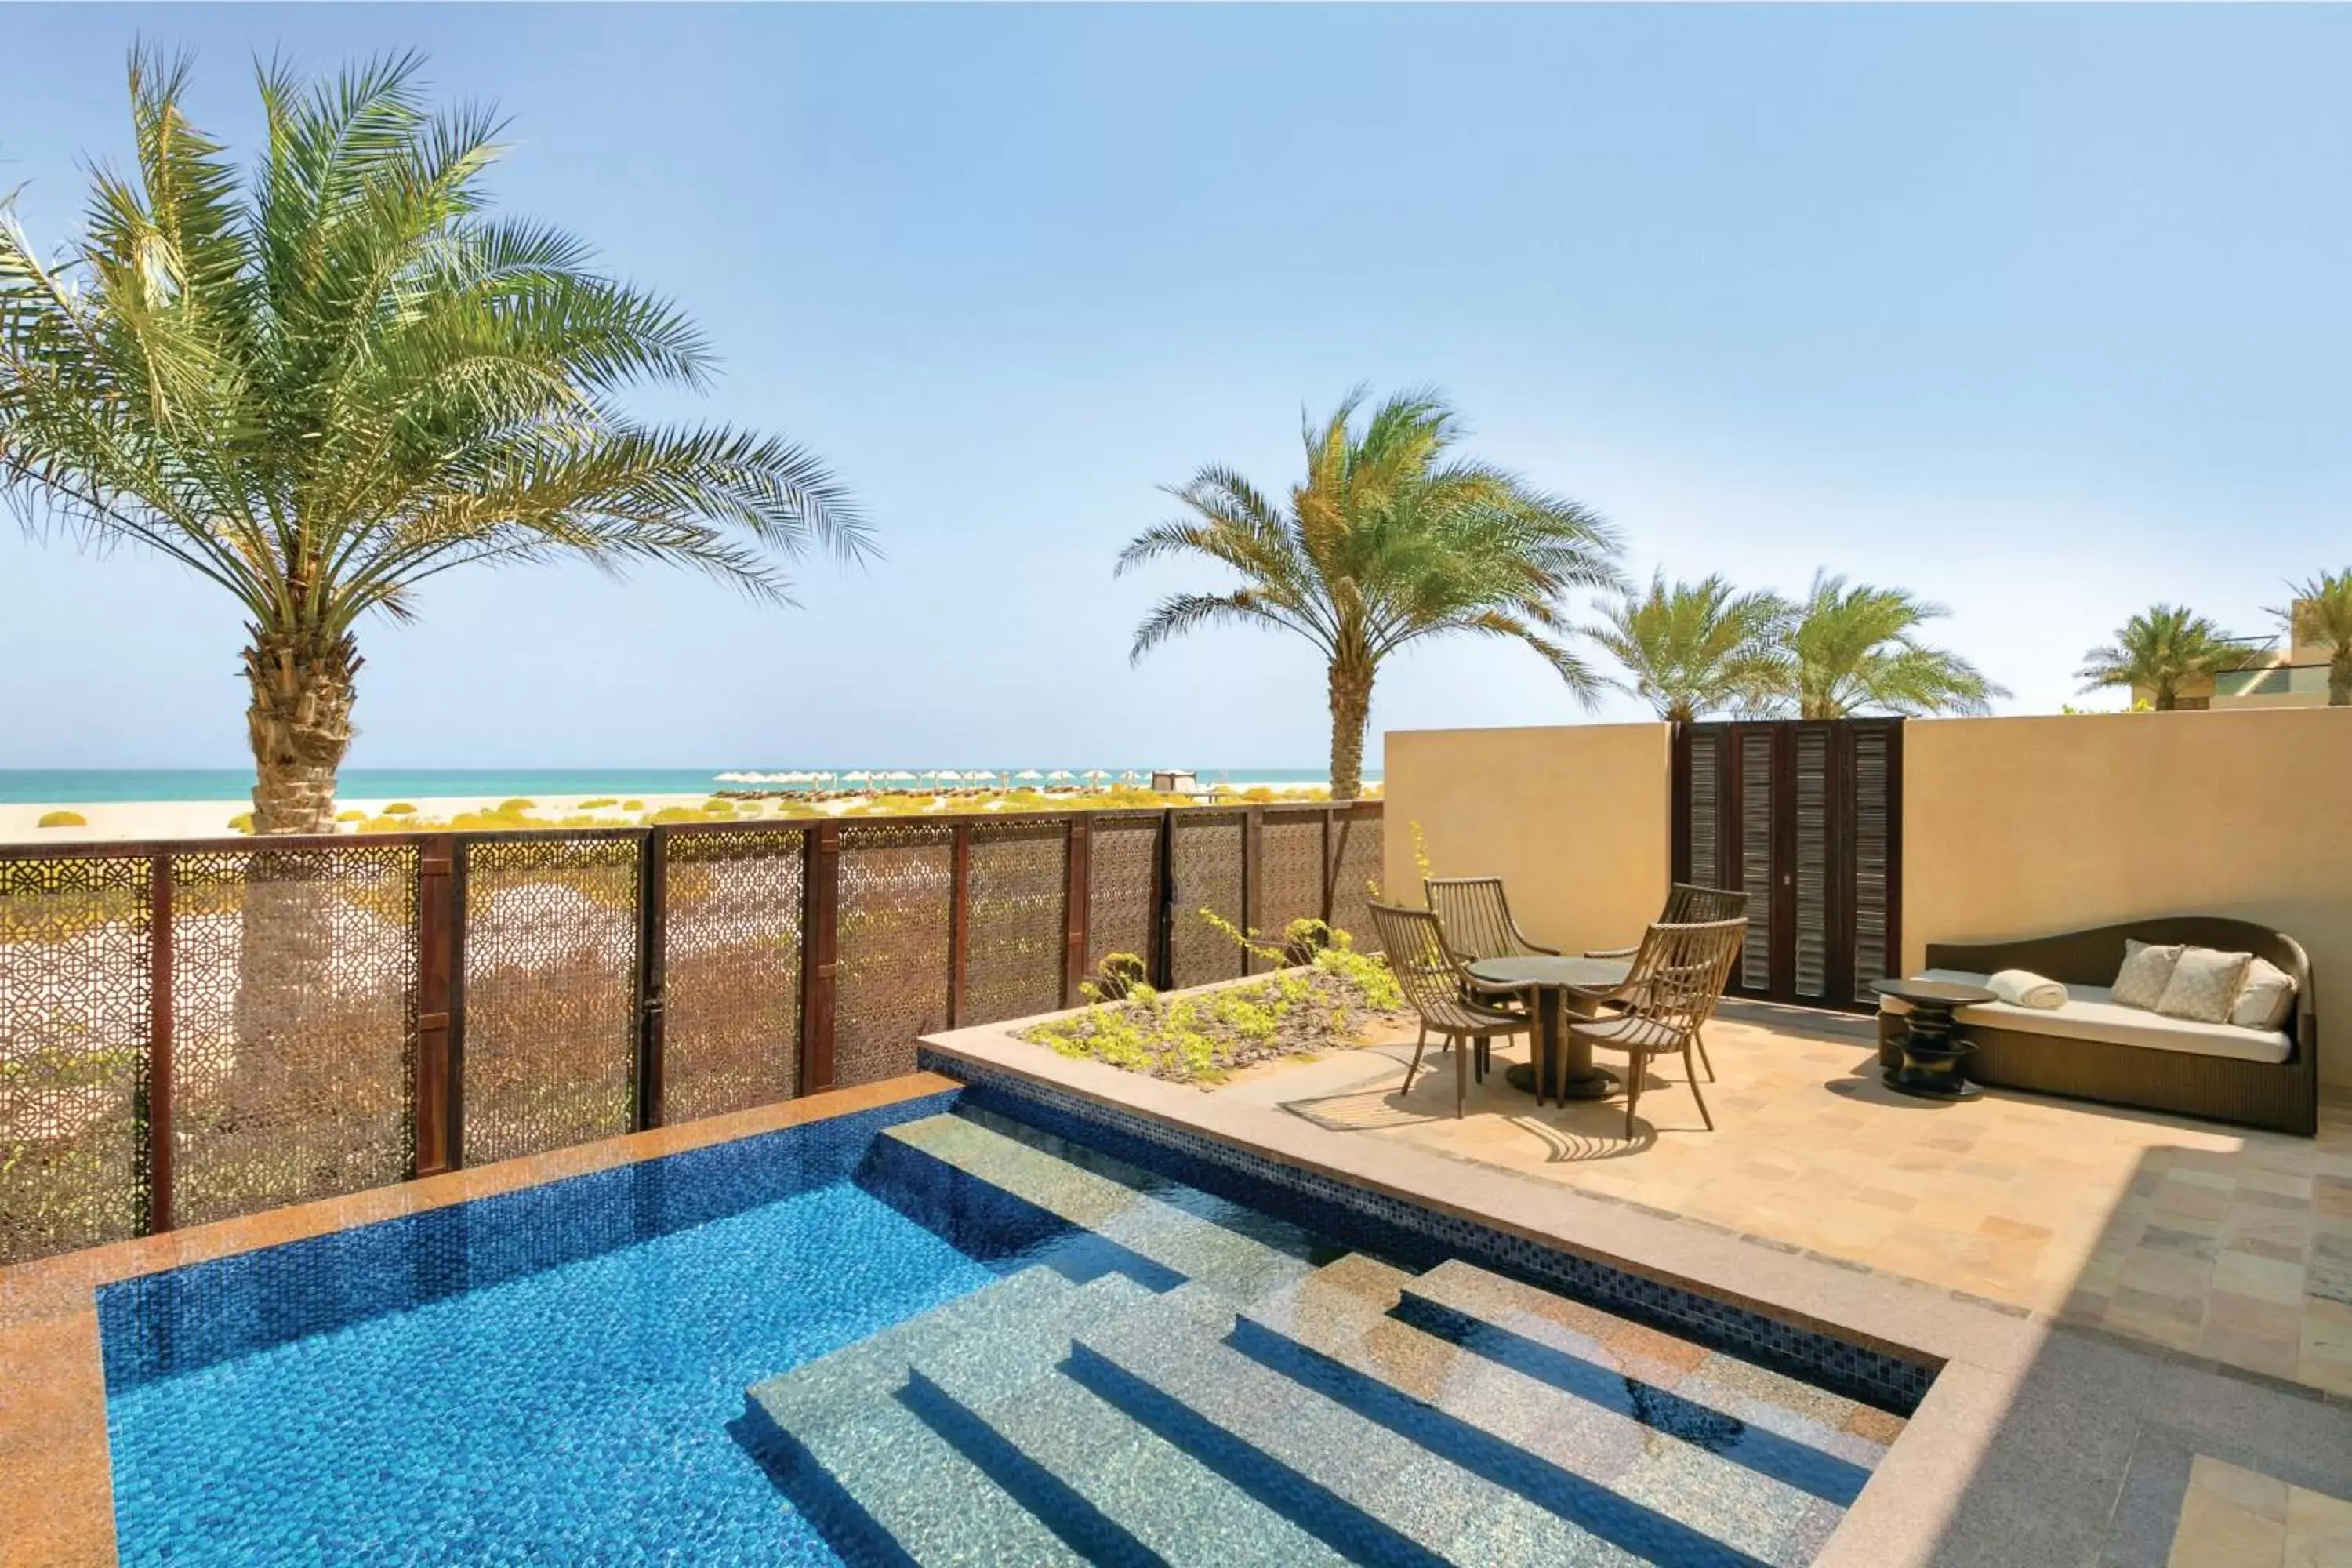 One-Bedroom Villa with Beach View and Plunge Pool in Park Hyatt Abu Dhabi Hotel and Villas